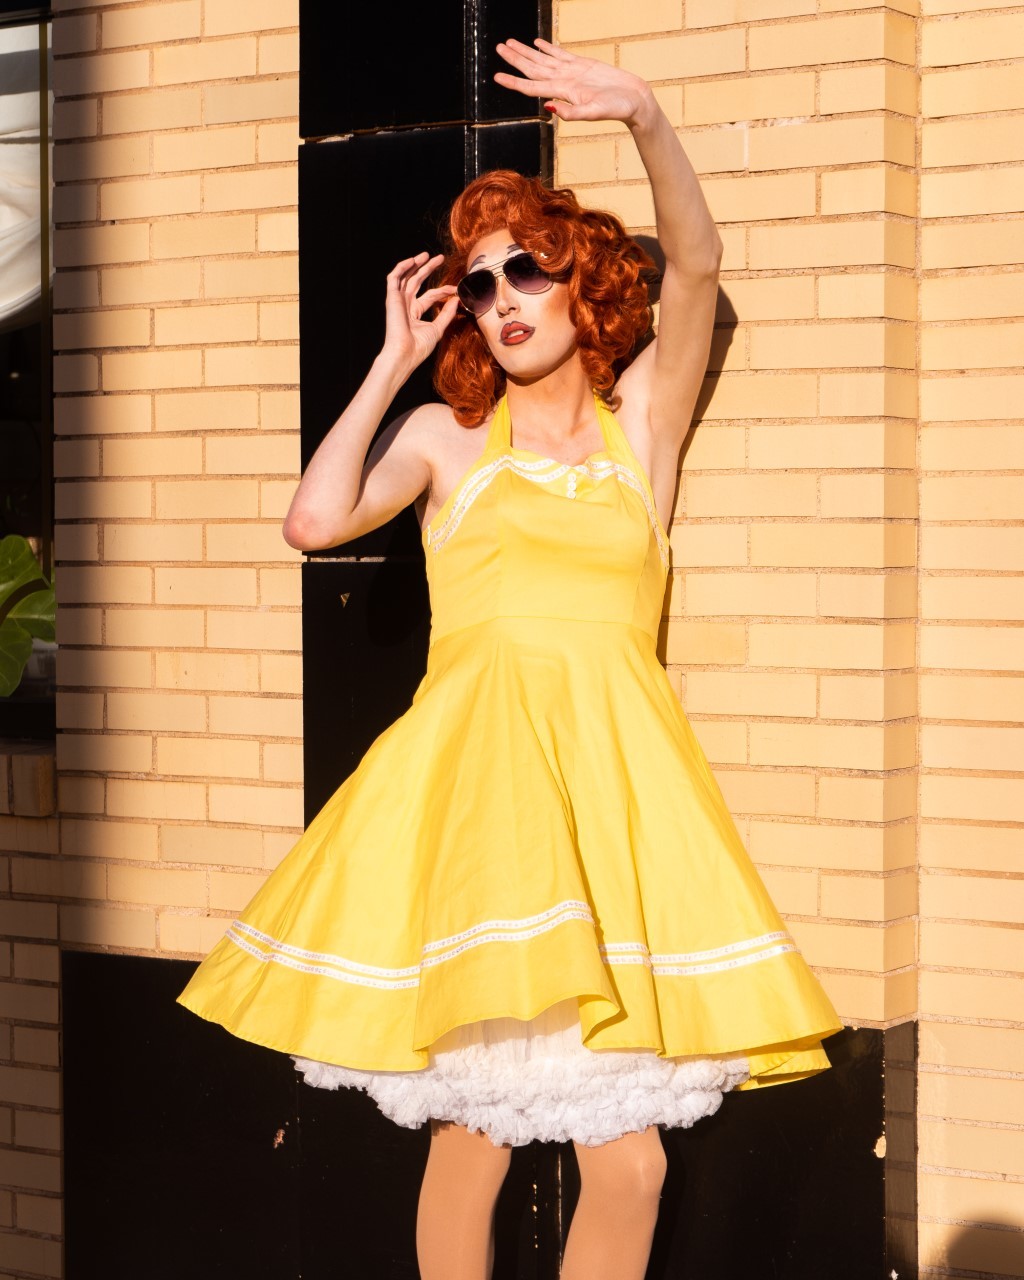 Drag queen Holly Wood Hills in a yellow, vintage cocktail dress and fiery red wig with dark sunglasses stands in the sun, back against a brick building. She is peering at the sun, one hand holding her glasses, the other stretched in front of her.